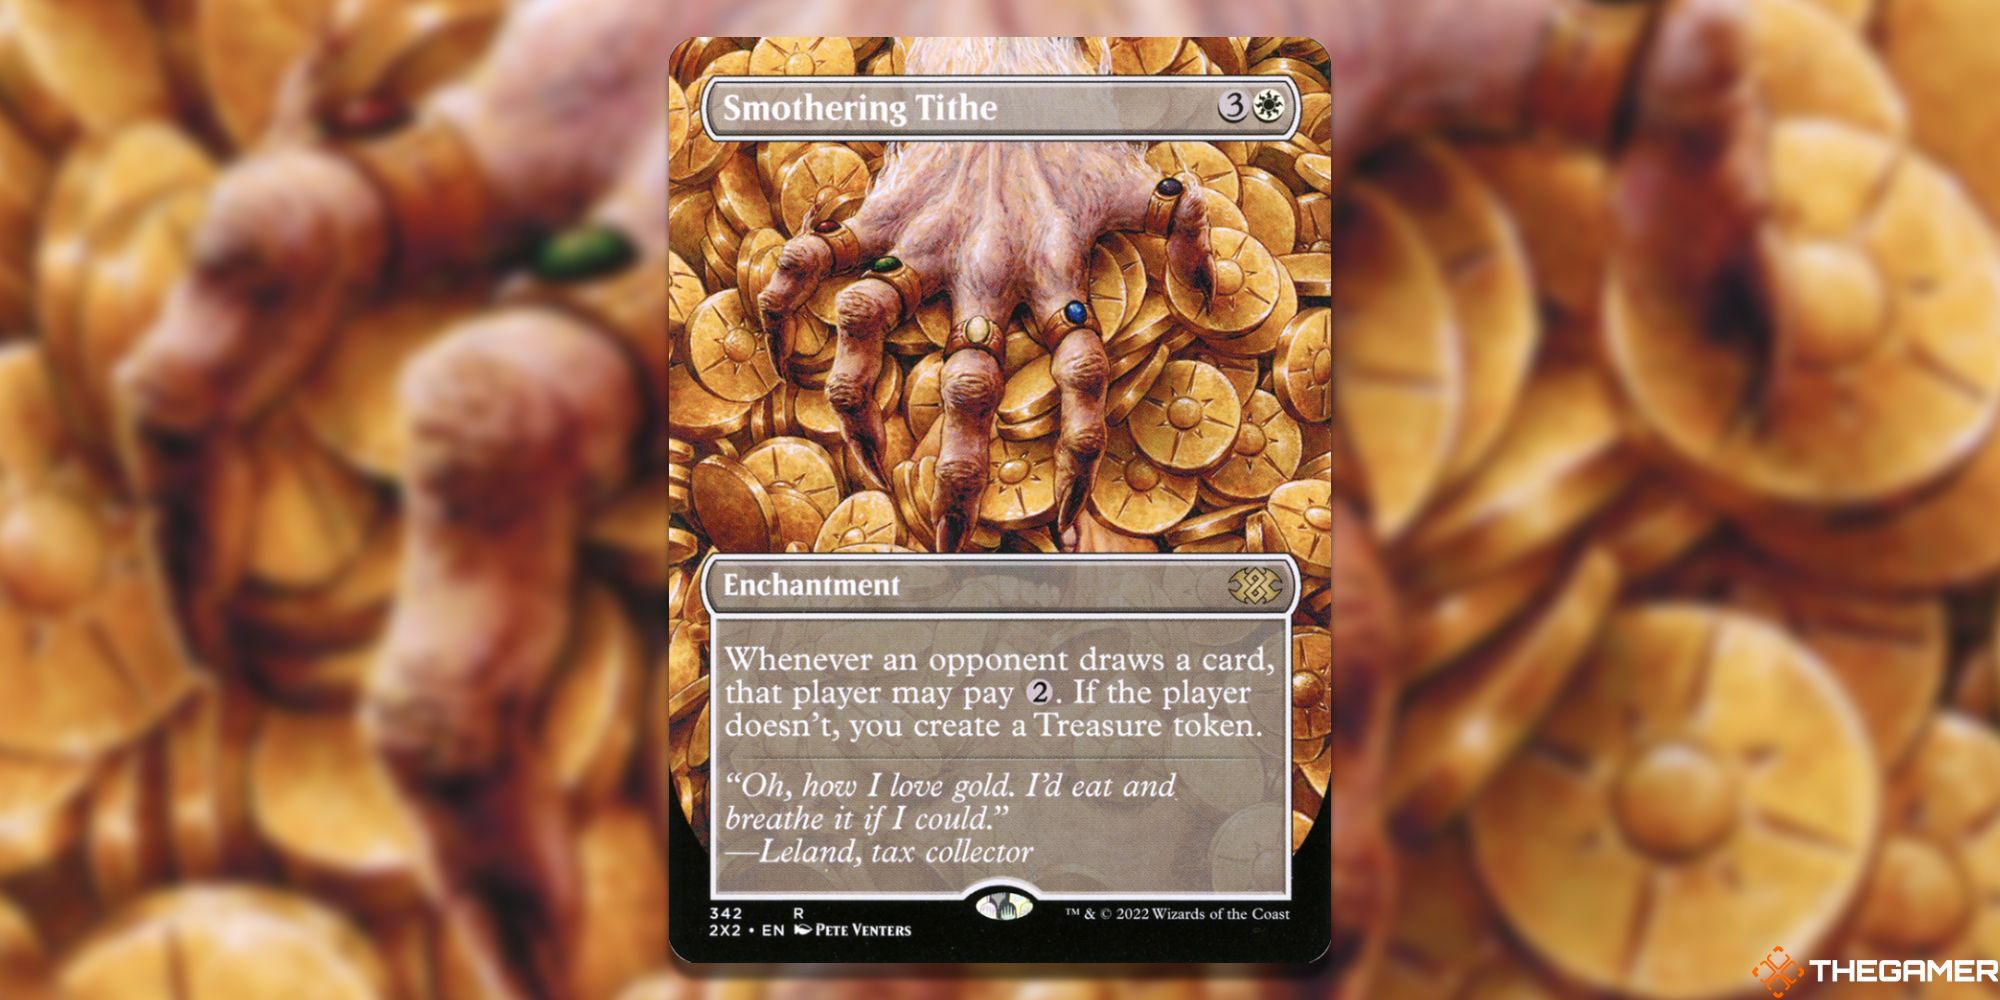 The card Smothering Tithe from Magic: The Gathering.